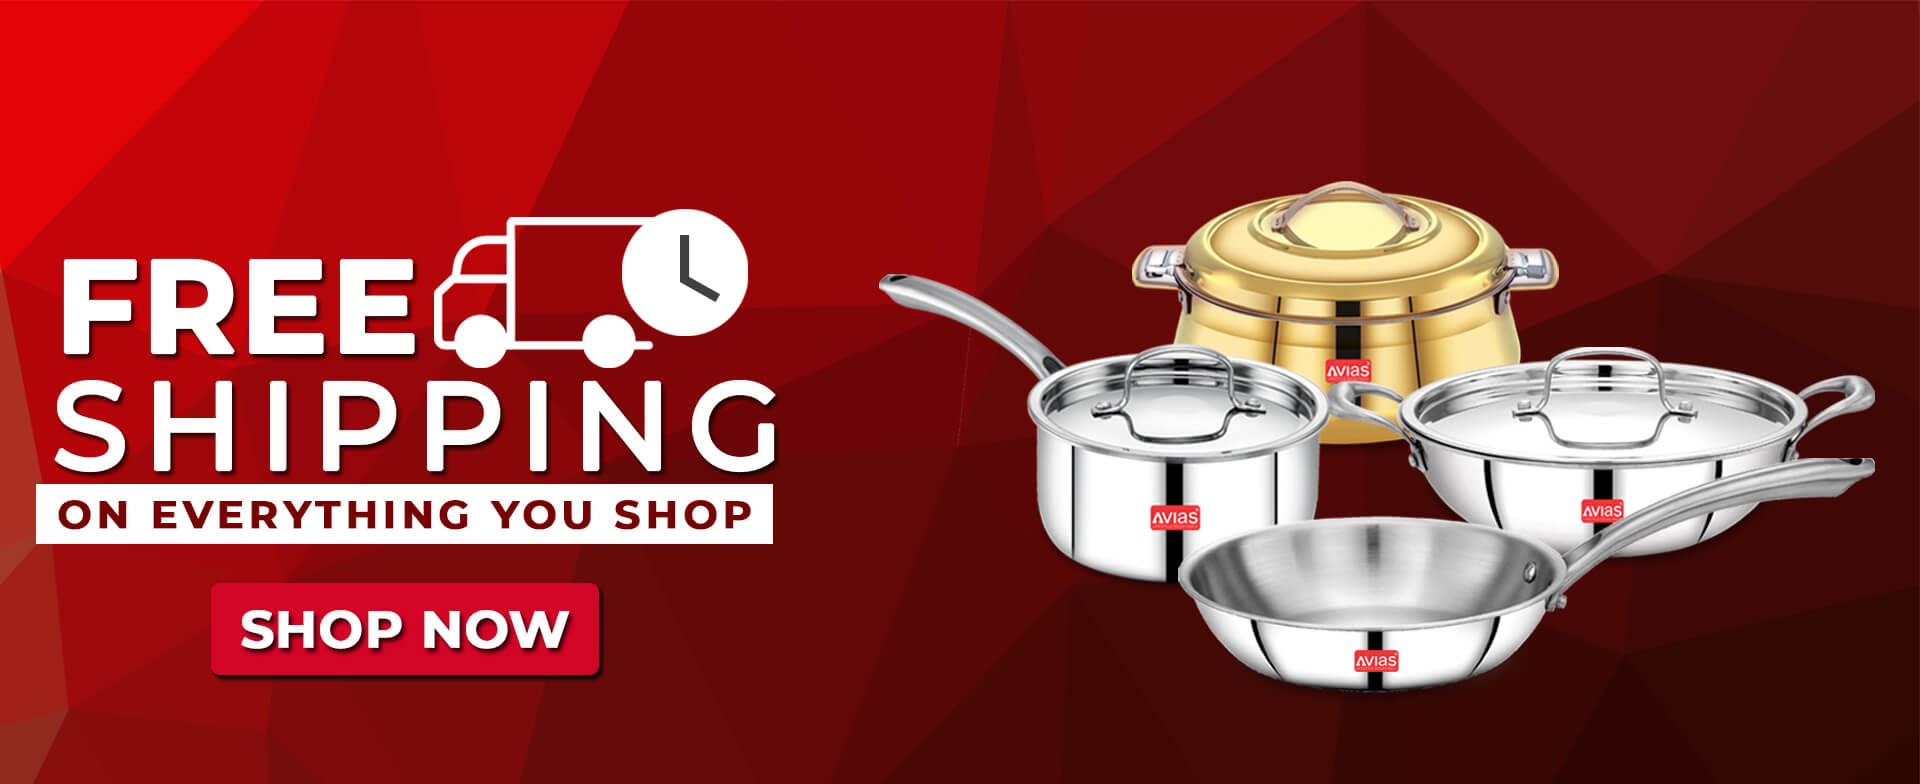 Free shipping for all kitchenware & cookware products